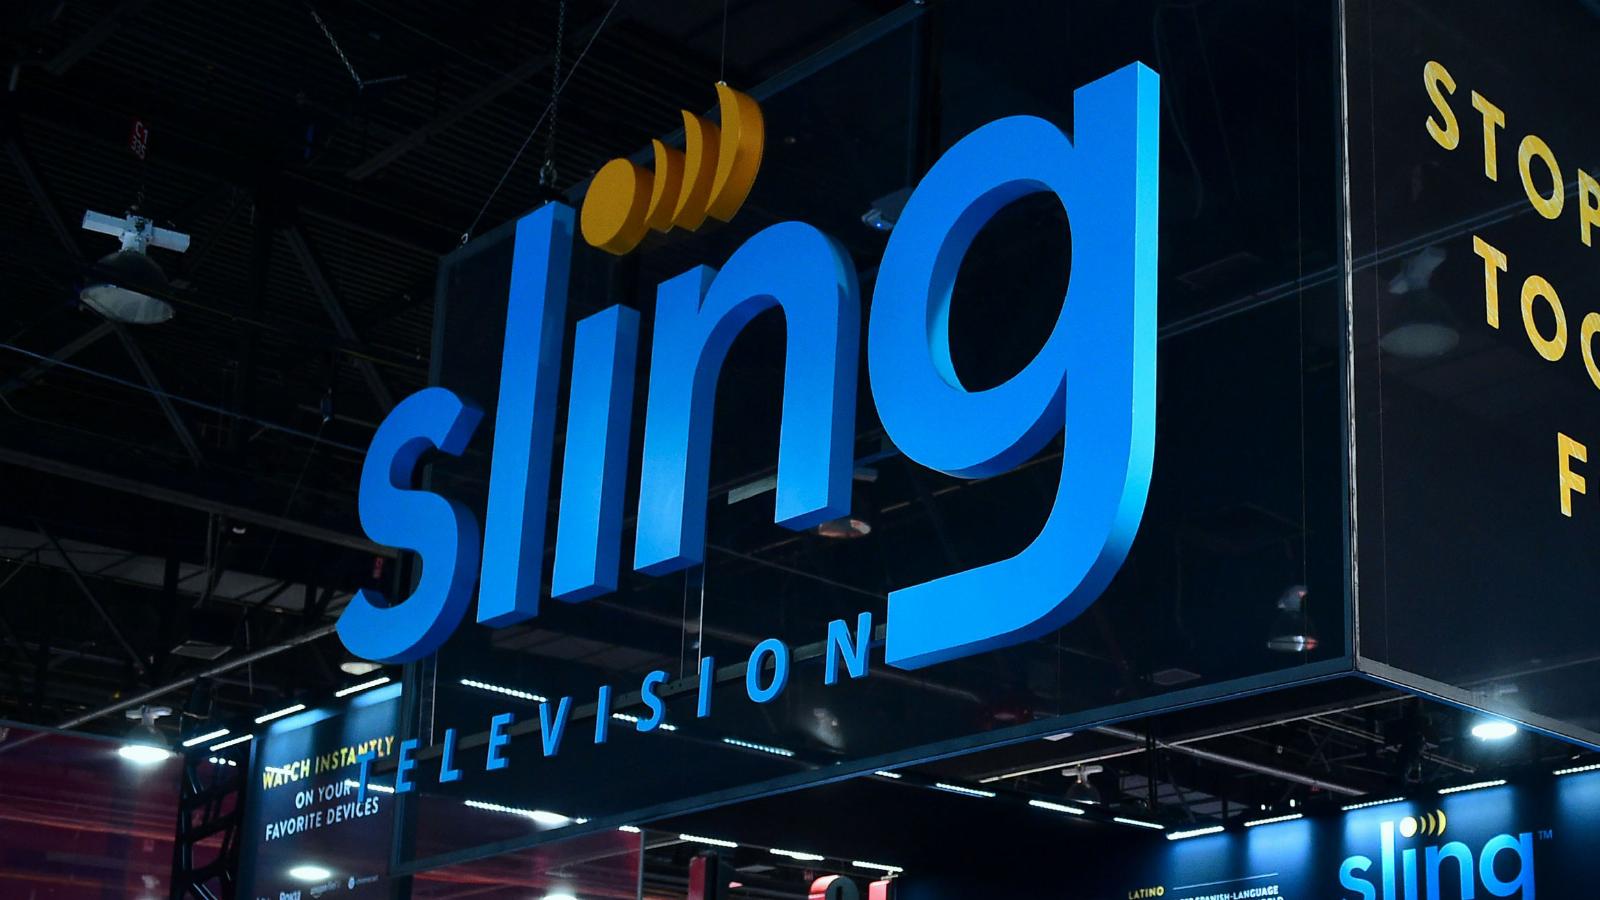 Sling TV’s subscriber base continues to tank, loses over 75K subs in Q4